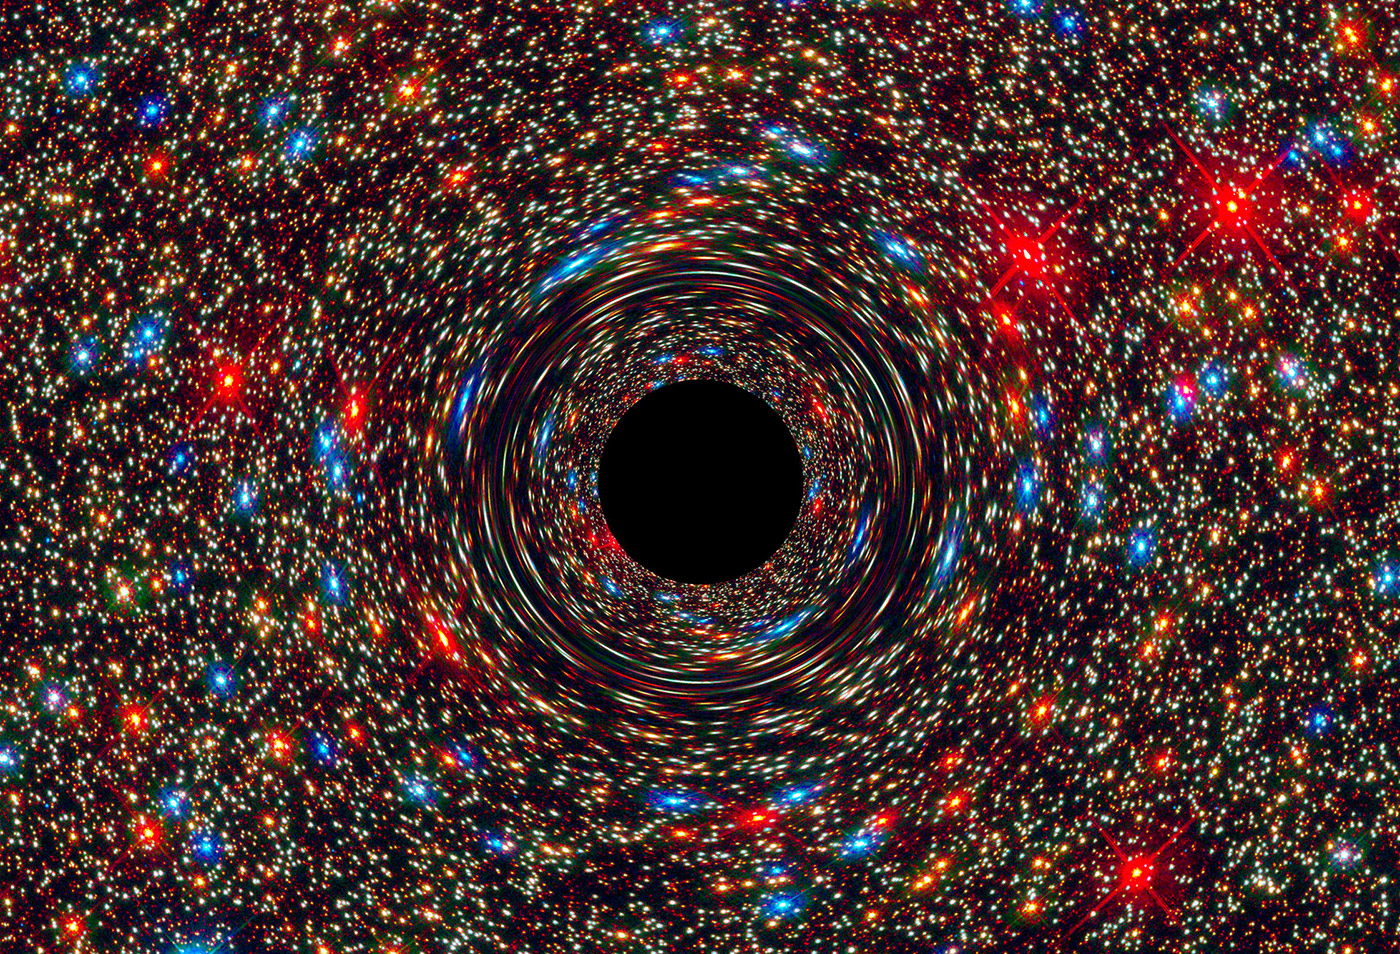 Astronomers find a supersized black hole in a cosmic small town